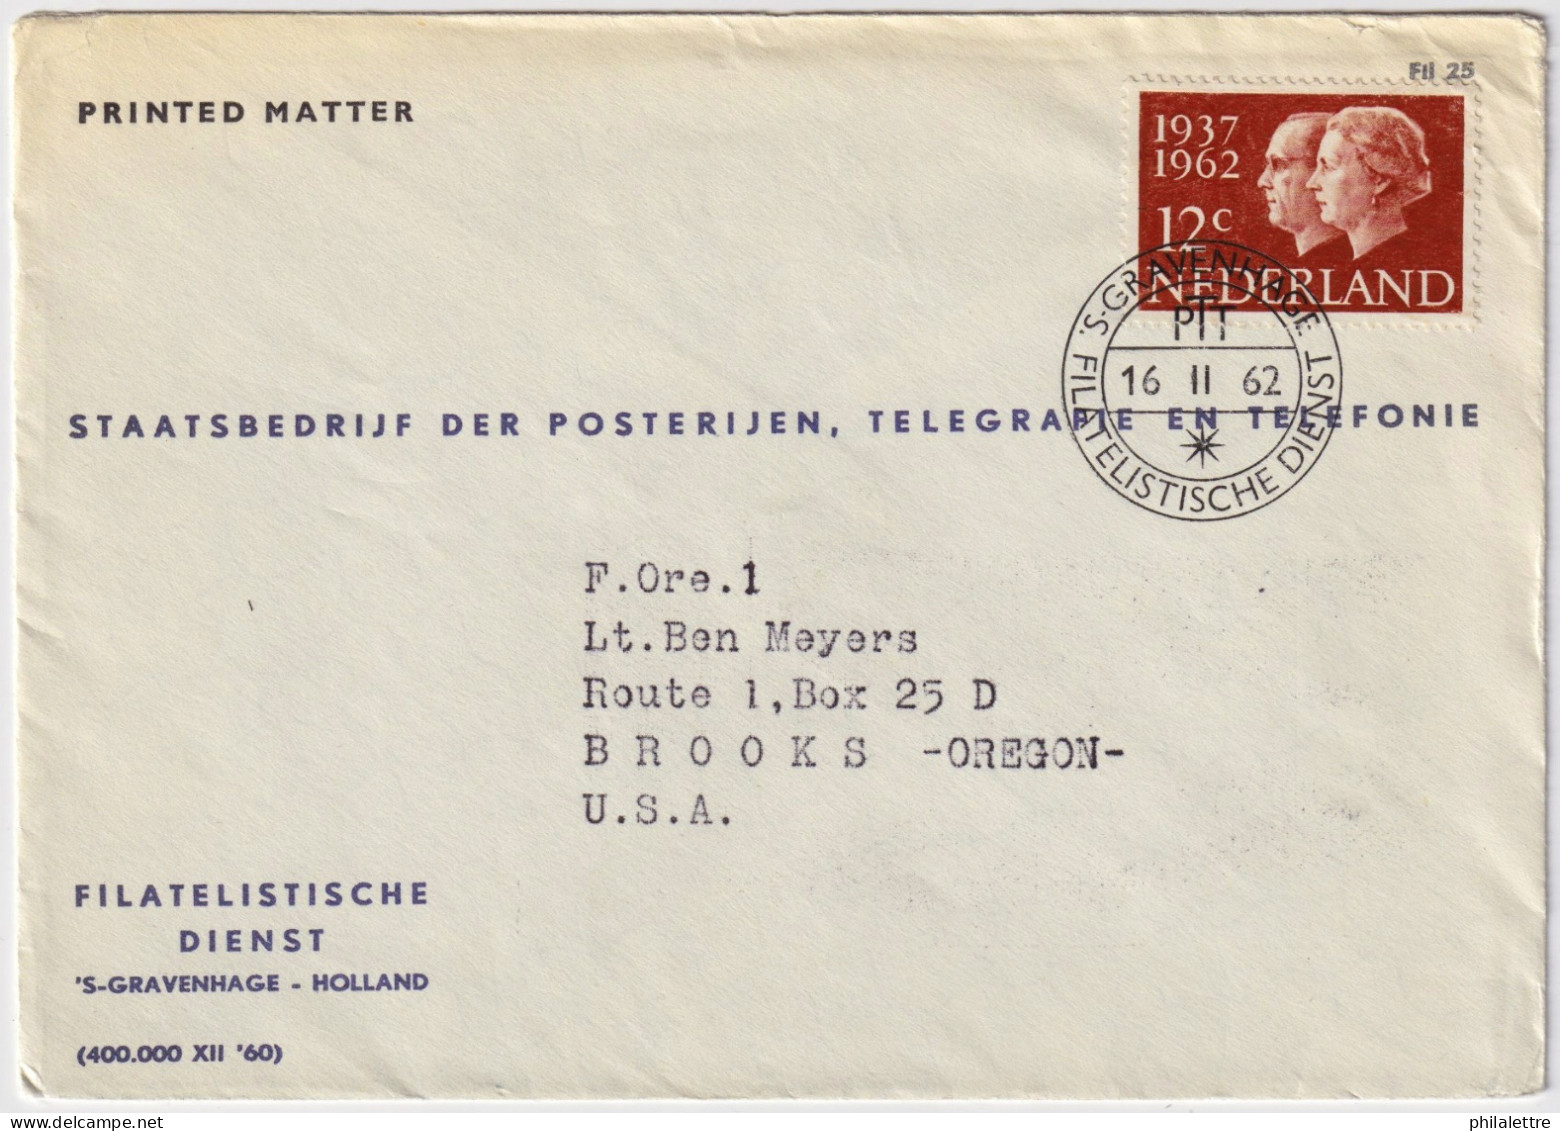 PAYS-BAS / THE NETHERLANDS - 1962 Mi.772 On PTT Cover From 'S-GRAVENHAGE To BROOKS, Oregon, USA - Covers & Documents